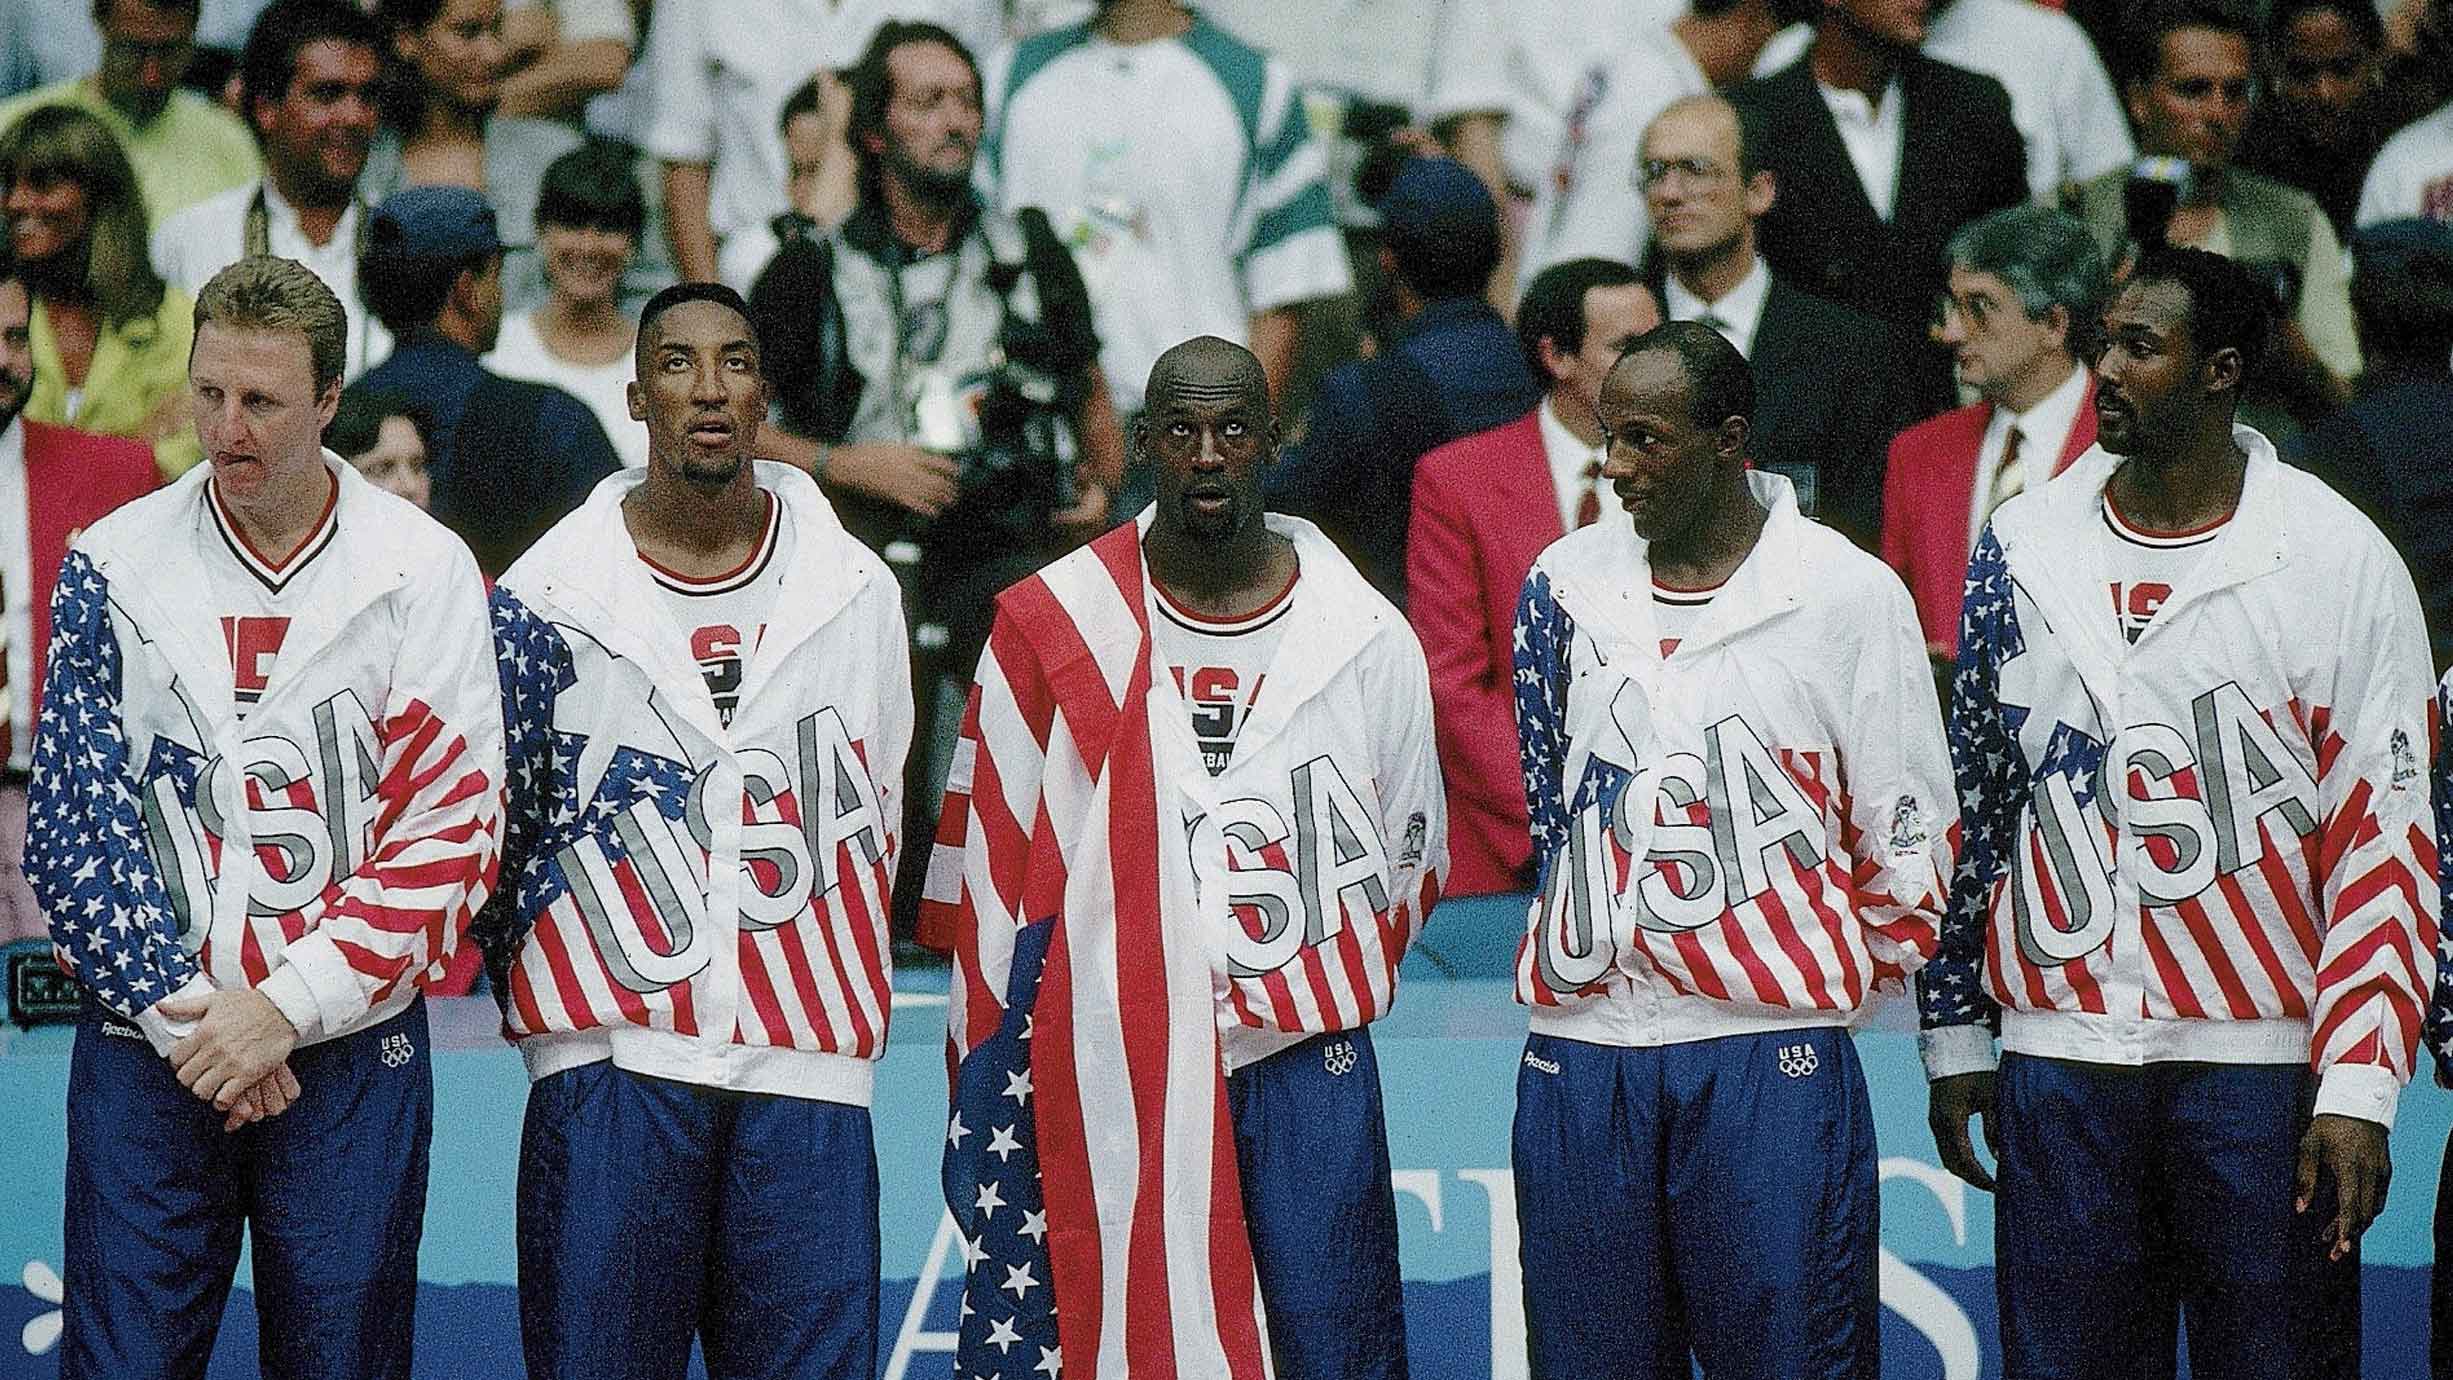 Every time the U.S. men's basketball team lost since the Dream Team - NBC  Sports